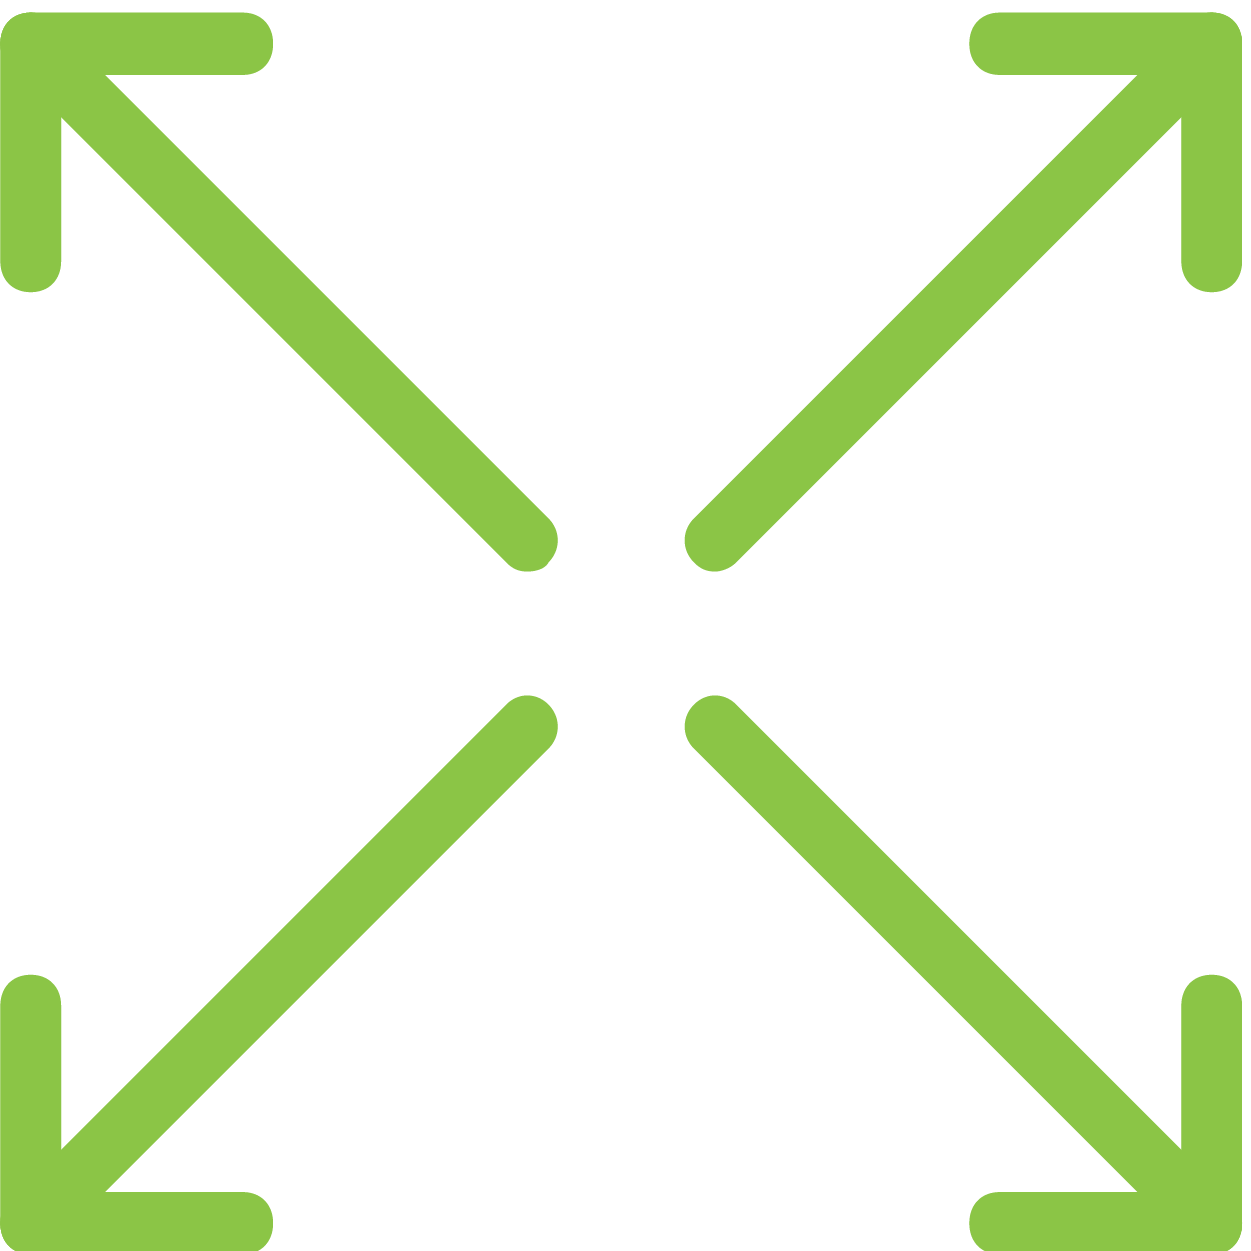 Light green icon of four arrows pointing outwards in each corner from the center.